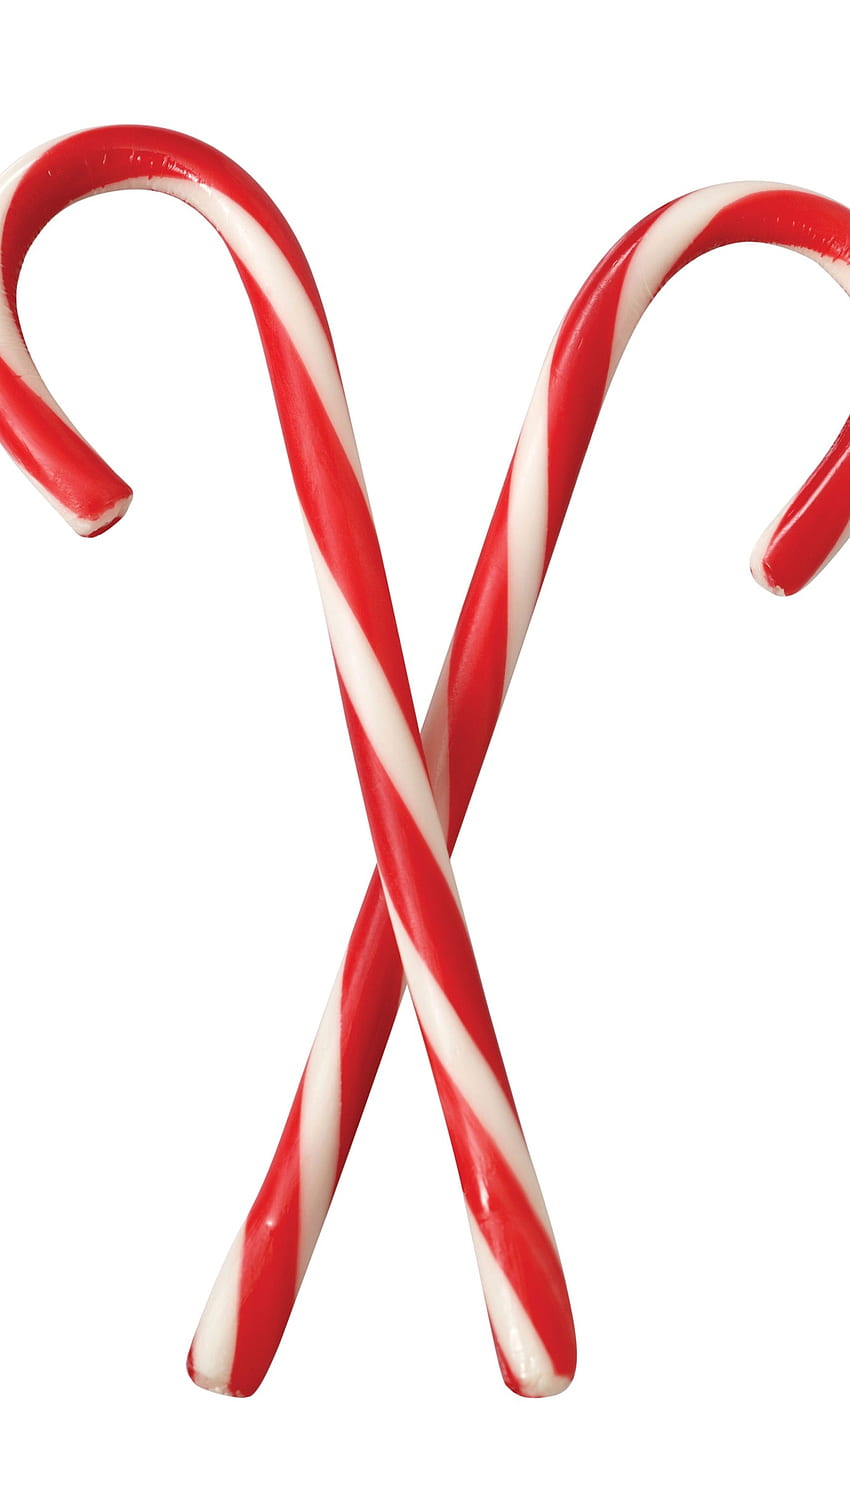 Candy Cane, Candy Candy HD phone wallpaper